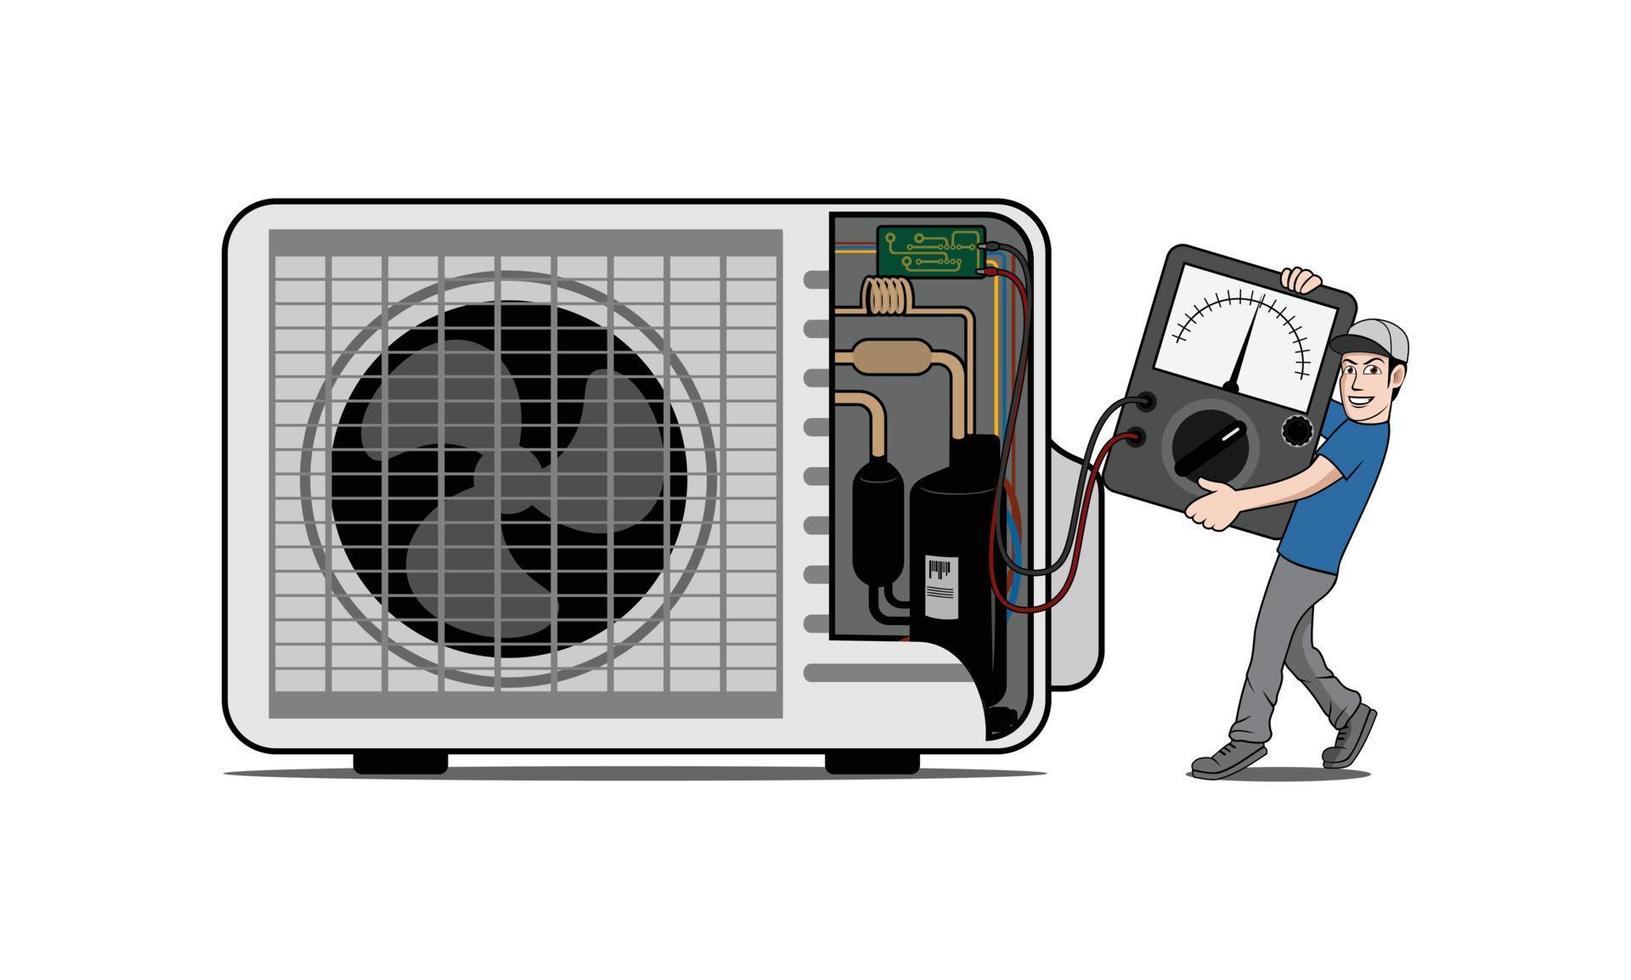 HVAC service with character design illustration vector